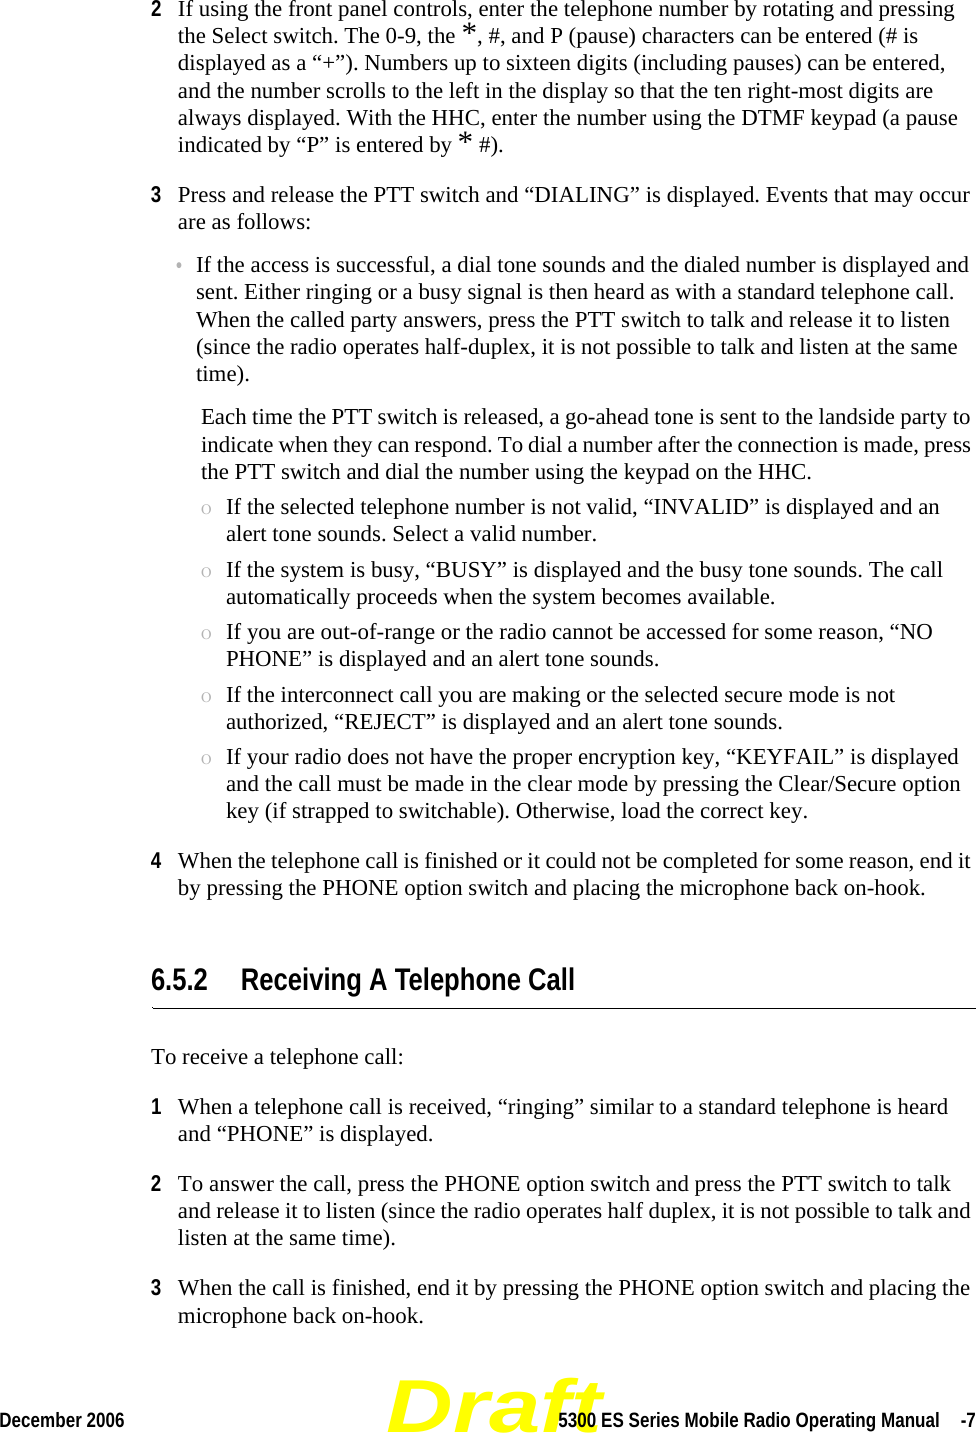 DraftDecember 2006 5300 ES Series Mobile Radio Operating Manual  -72If using the front panel controls, enter the telephone number by rotating and pressing the Select switch. The 0-9, the *, #, and P (pause) characters can be entered (# is displayed as a “+”). Numbers up to sixteen digits (including pauses) can be entered, and the number scrolls to the left in the display so that the ten right-most digits are always displayed. With the HHC, enter the number using the DTMF keypad (a pause indicated by “P” is entered by * #).3Press and release the PTT switch and “DIALING” is displayed. Events that may occur are as follows:•If the access is successful, a dial tone sounds and the dialed number is displayed and sent. Either ringing or a busy signal is then heard as with a standard telephone call. When the called party answers, press the PTT switch to talk and release it to listen (since the radio operates half-duplex, it is not possible to talk and listen at the same time).Each time the PTT switch is released, a go-ahead tone is sent to the landside party to indicate when they can respond. To dial a number after the connection is made, press the PTT switch and dial the number using the keypad on the HHC.ΟIf the selected telephone number is not valid, “INVALID” is displayed and an alert tone sounds. Select a valid number.ΟIf the system is busy, “BUSY” is displayed and the busy tone sounds. The call automatically proceeds when the system becomes available.ΟIf you are out-of-range or the radio cannot be accessed for some reason, “NO PHONE” is displayed and an alert tone sounds.ΟIf the interconnect call you are making or the selected secure mode is not authorized, “REJECT” is displayed and an alert tone sounds.ΟIf your radio does not have the proper encryption key, “KEYFAIL” is displayed and the call must be made in the clear mode by pressing the Clear/Secure option key (if strapped to switchable). Otherwise, load the correct key.4When the telephone call is finished or it could not be completed for some reason, end it by pressing the PHONE option switch and placing the microphone back on-hook.6.5.2 Receiving A Telephone CallTo receive a telephone call:1When a telephone call is received, “ringing” similar to a standard telephone is heard and “PHONE” is displayed.2To answer the call, press the PHONE option switch and press the PTT switch to talk and release it to listen (since the radio operates half duplex, it is not possible to talk and listen at the same time).3When the call is finished, end it by pressing the PHONE option switch and placing the microphone back on-hook.